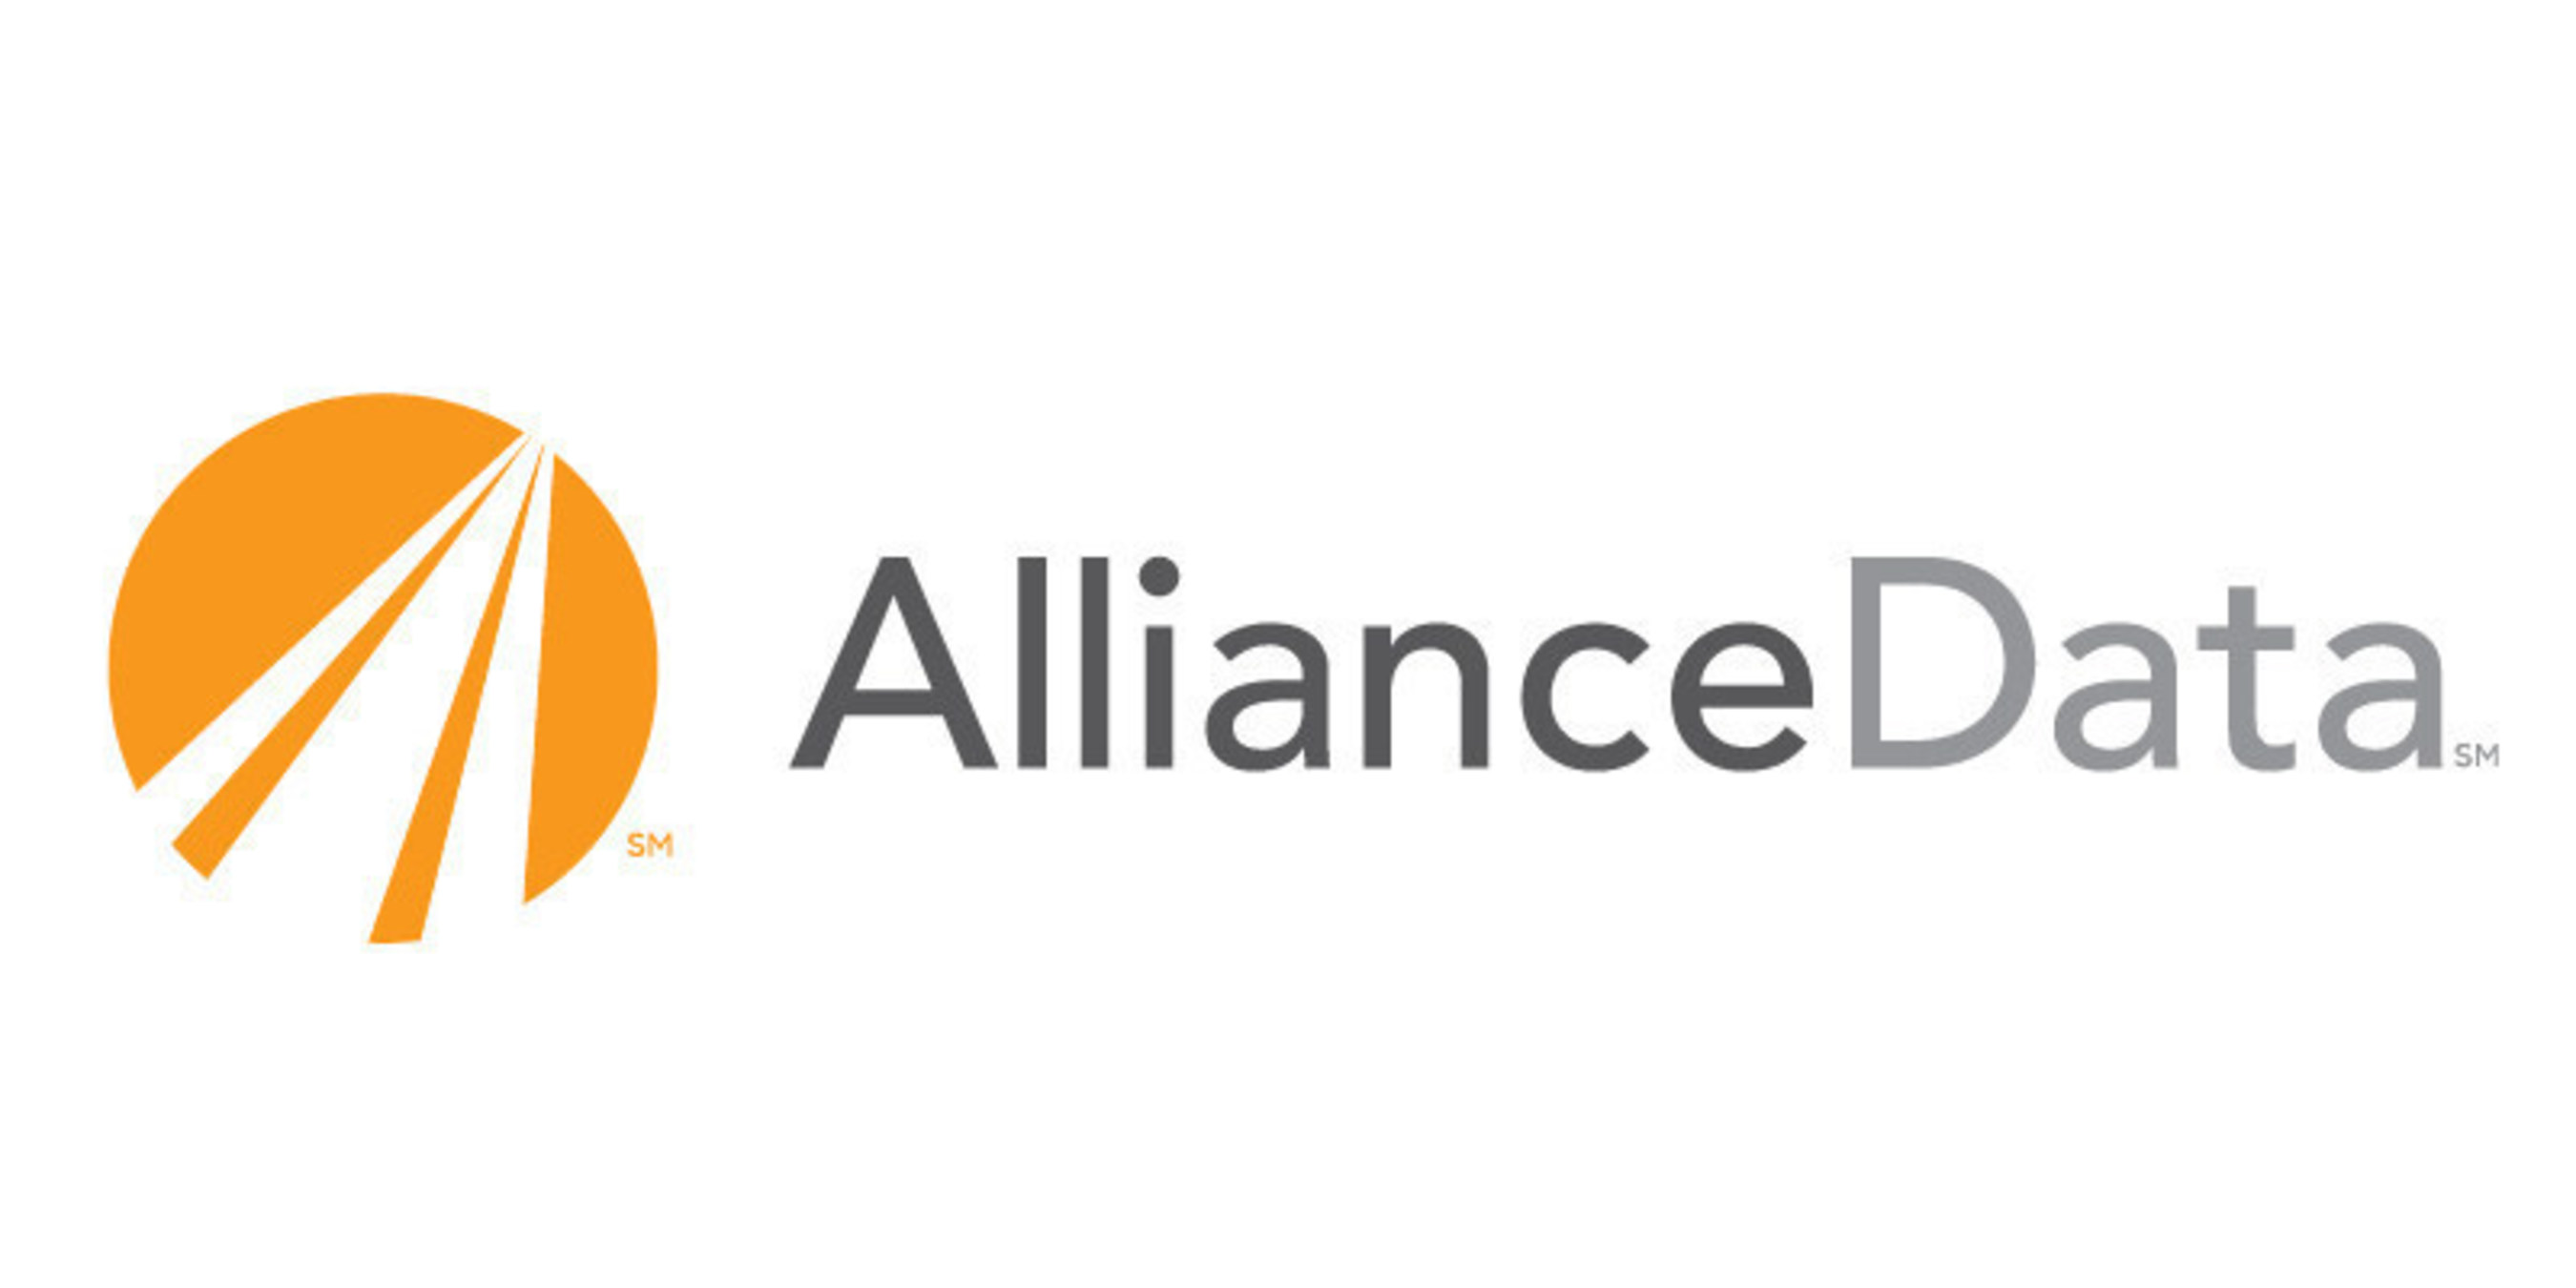 Alliance Data's MyLoyalty App is customized to each brand and provides customers with the ability to apply, shop, earn and connect with their favorite brands. Retailers and customers may choose from a variety of features including the ability to apply for a store-brand credit card, make purchases with the MyDigitalCard, and earn and redeem rewards at the point of sale.